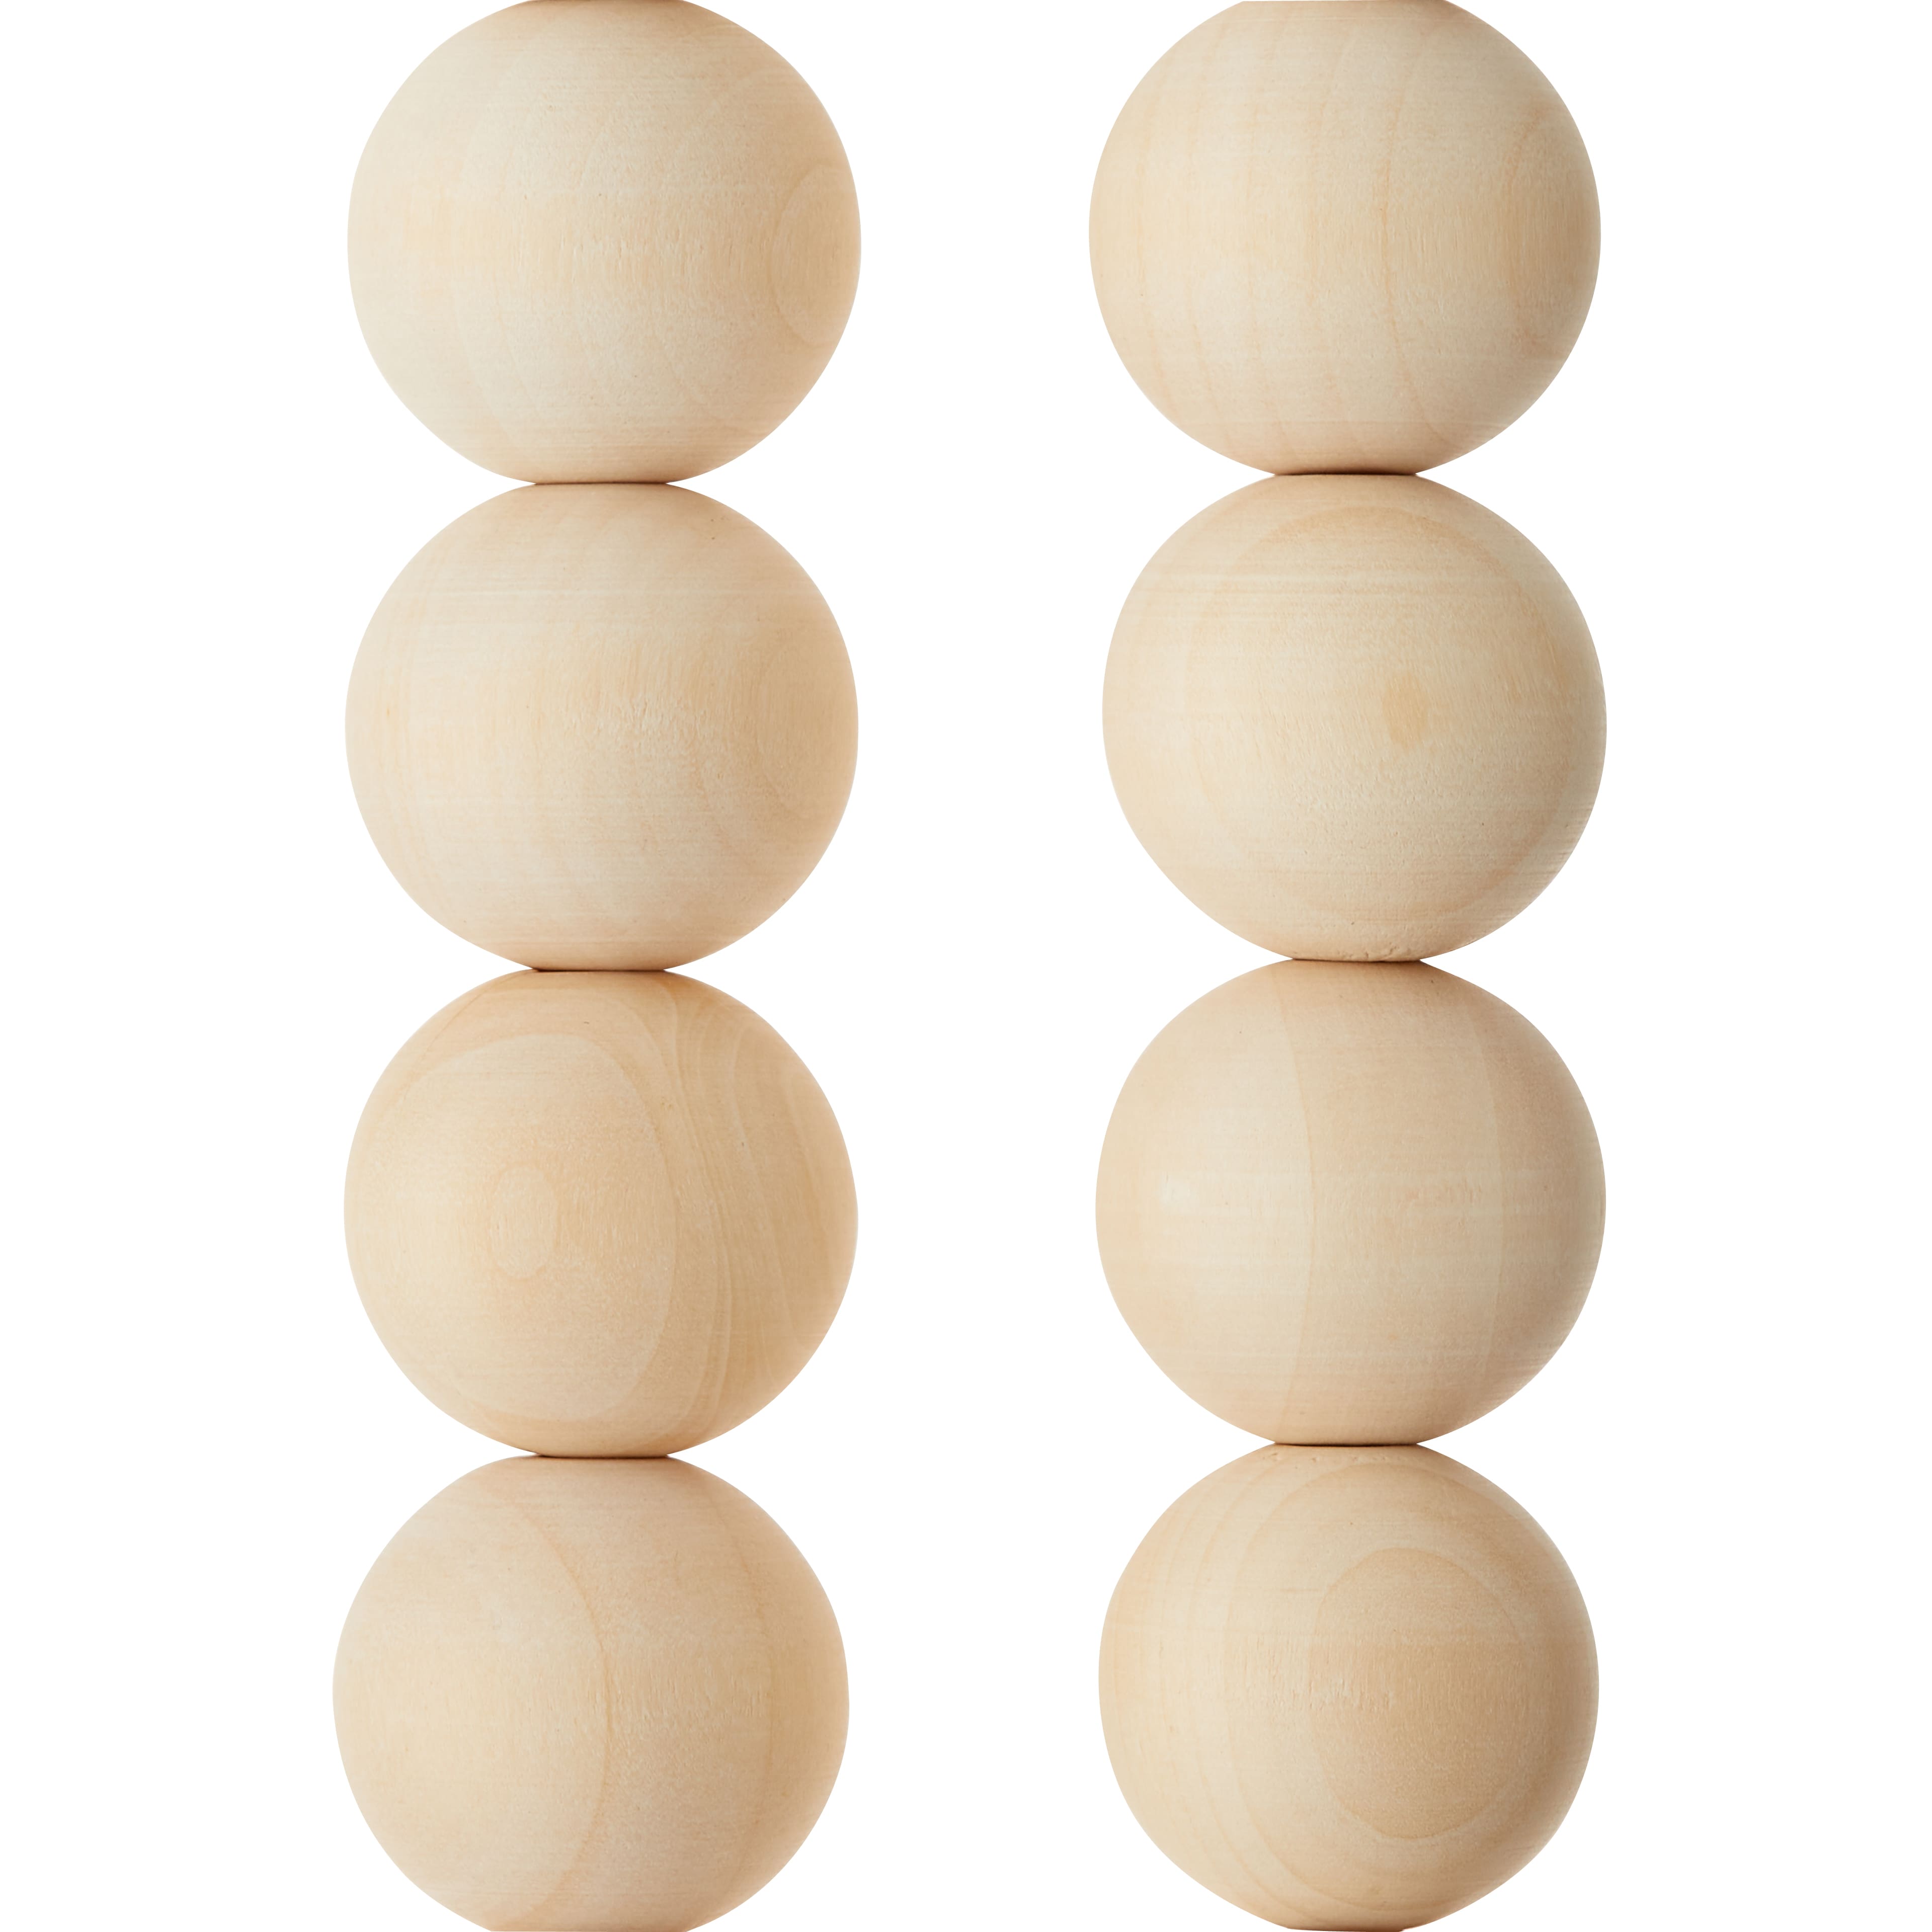 16, 20 or 40mm Wooden Bead, for Beading, Hobbies, Crafts, Ornaments or  Decor 